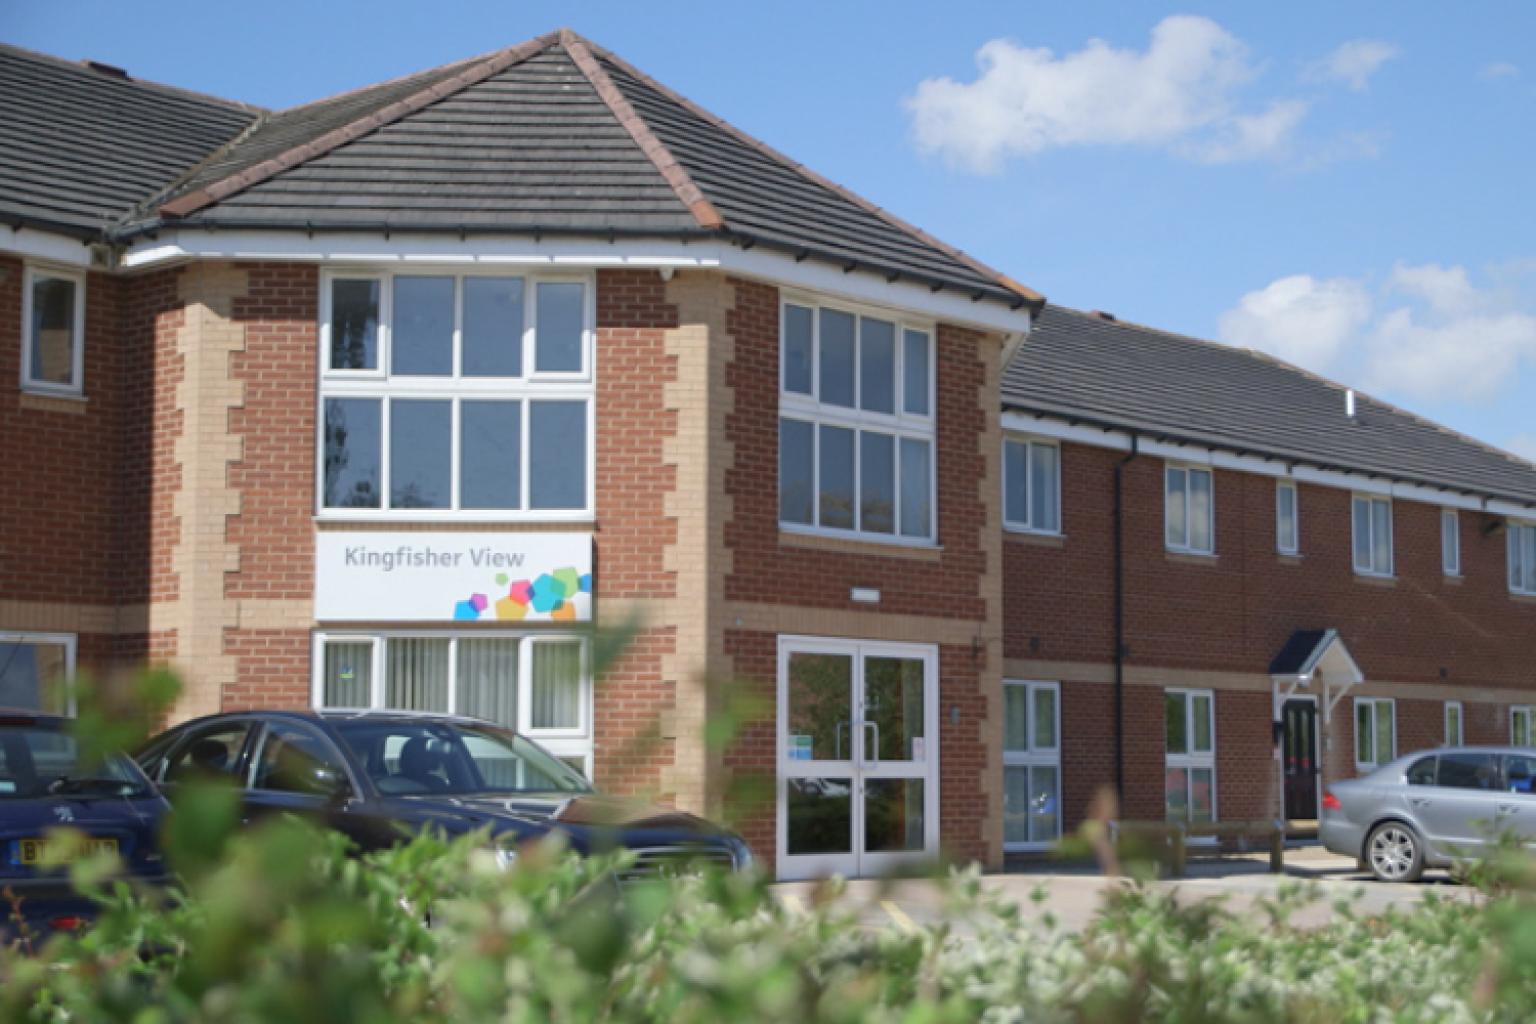 Kingfisher View care home in Castleford